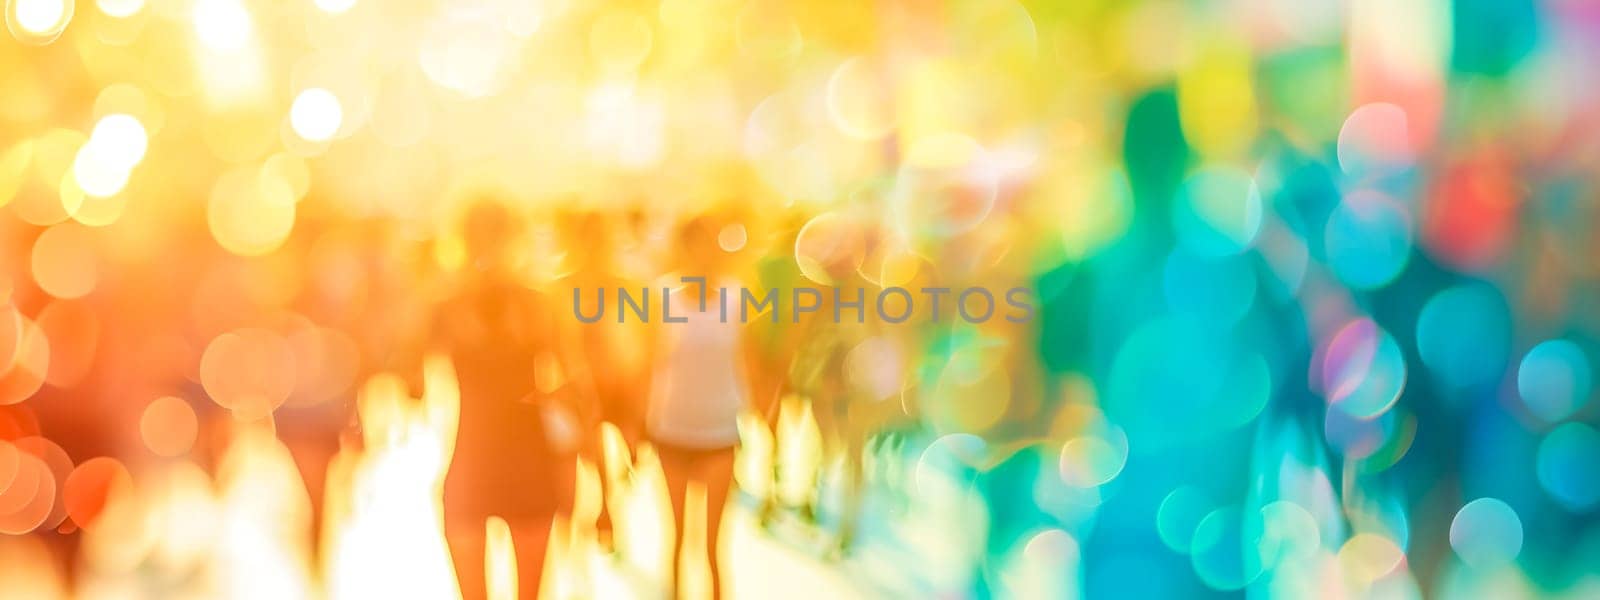 bokeh effect consisting of multicolored circles of light that create a sense of depth and movement, blurred shapes atmosphere of a crowd or gathering, possibly at an event, festival, or public space.